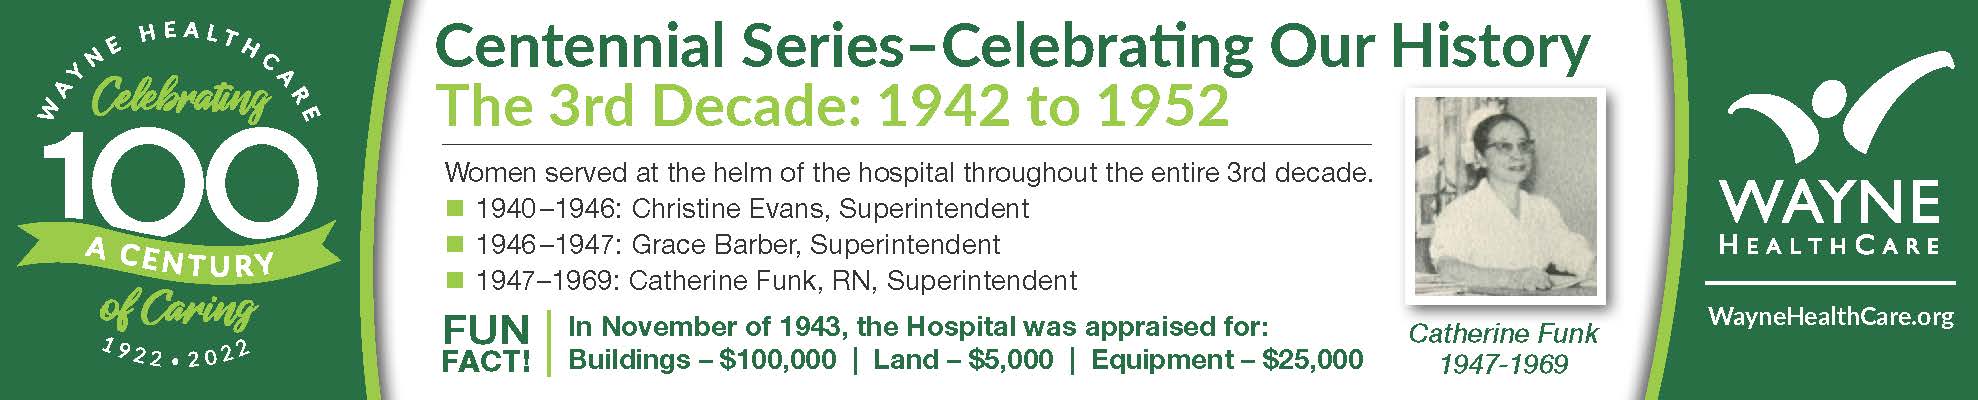 3rd Decade Centennial  information about Wayne HealthCare Picture of Catherine Funk